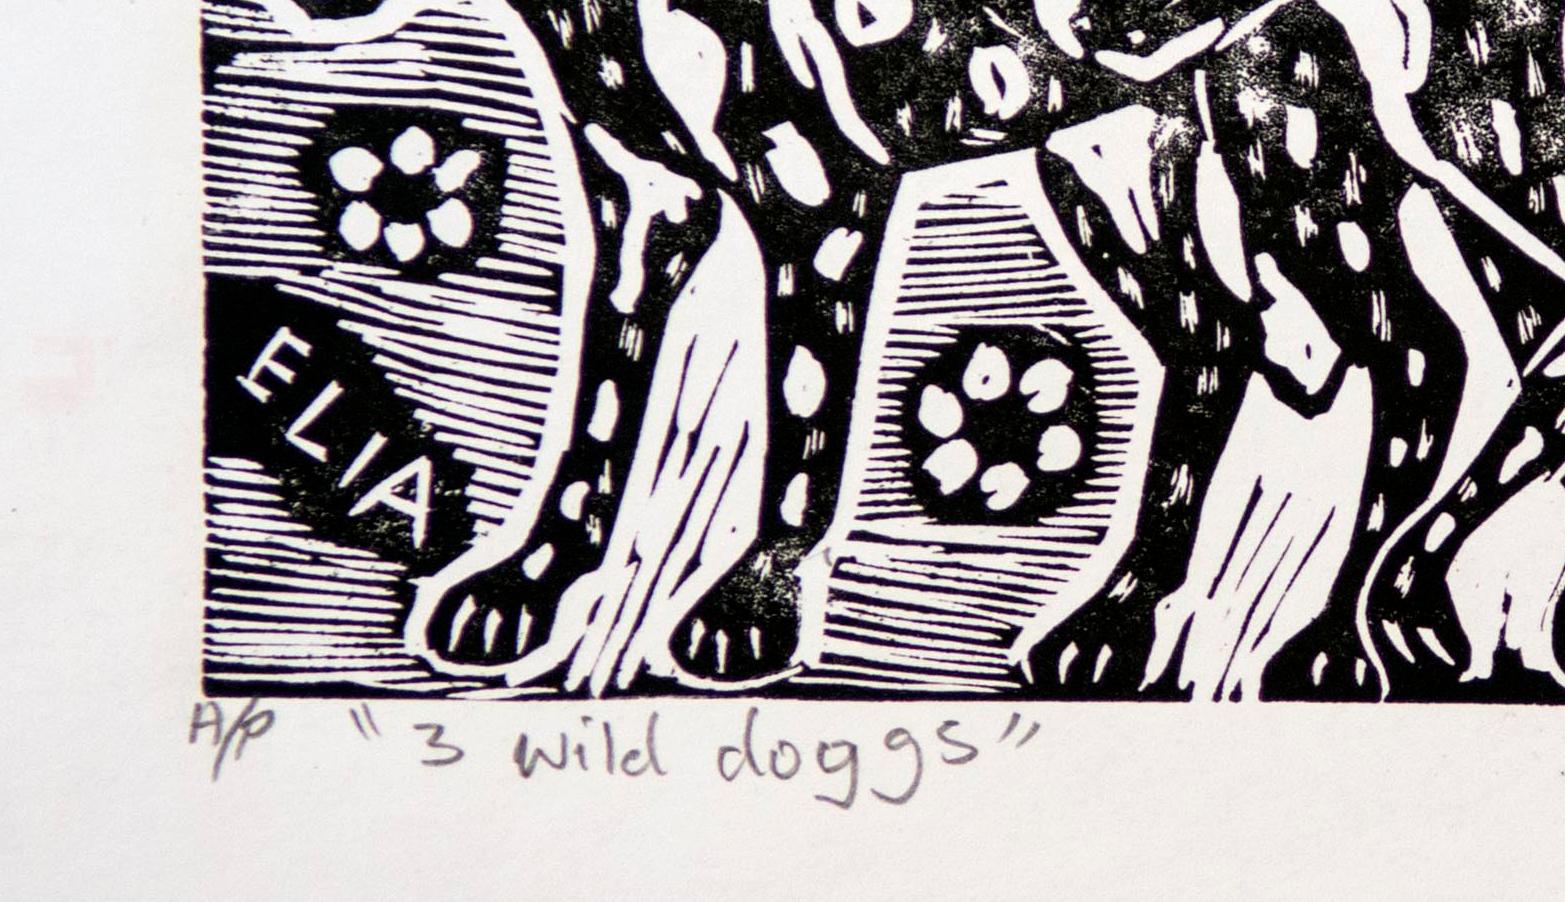 3 Wild Dogs, 2011. Linoleum block print on paper. Unlimited Edition

Elia Shiwoohamba was born in 1981 in Windhoek, Namibia. He graduated from the John Muafangejo Art Centre in Windhoek in 2006. Specialising in printmaking and sculpture, Shiwoohamba